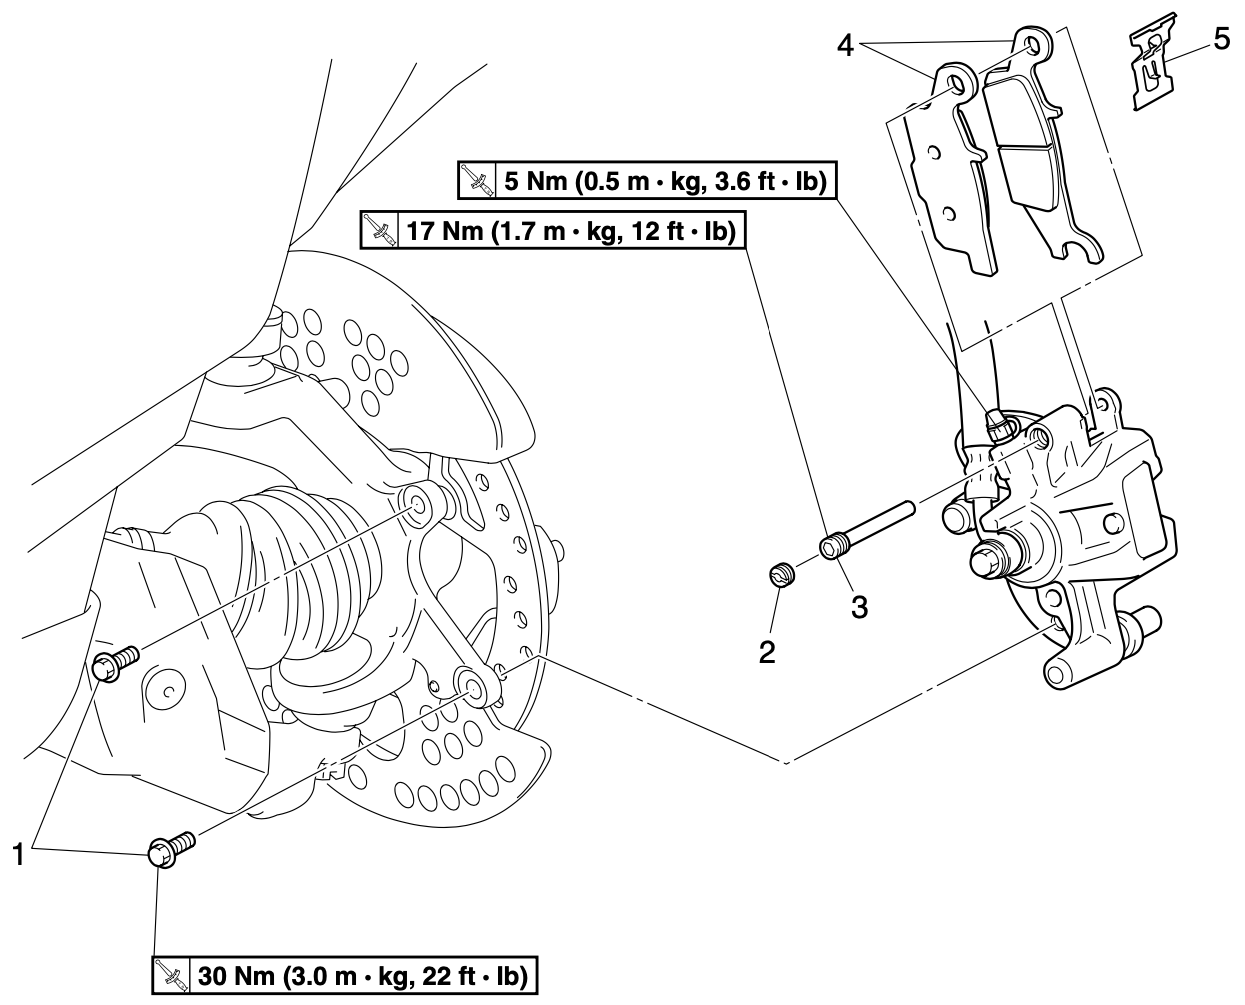 2007 Yamaha Grizzly 700 Front Brake Pads Diagram